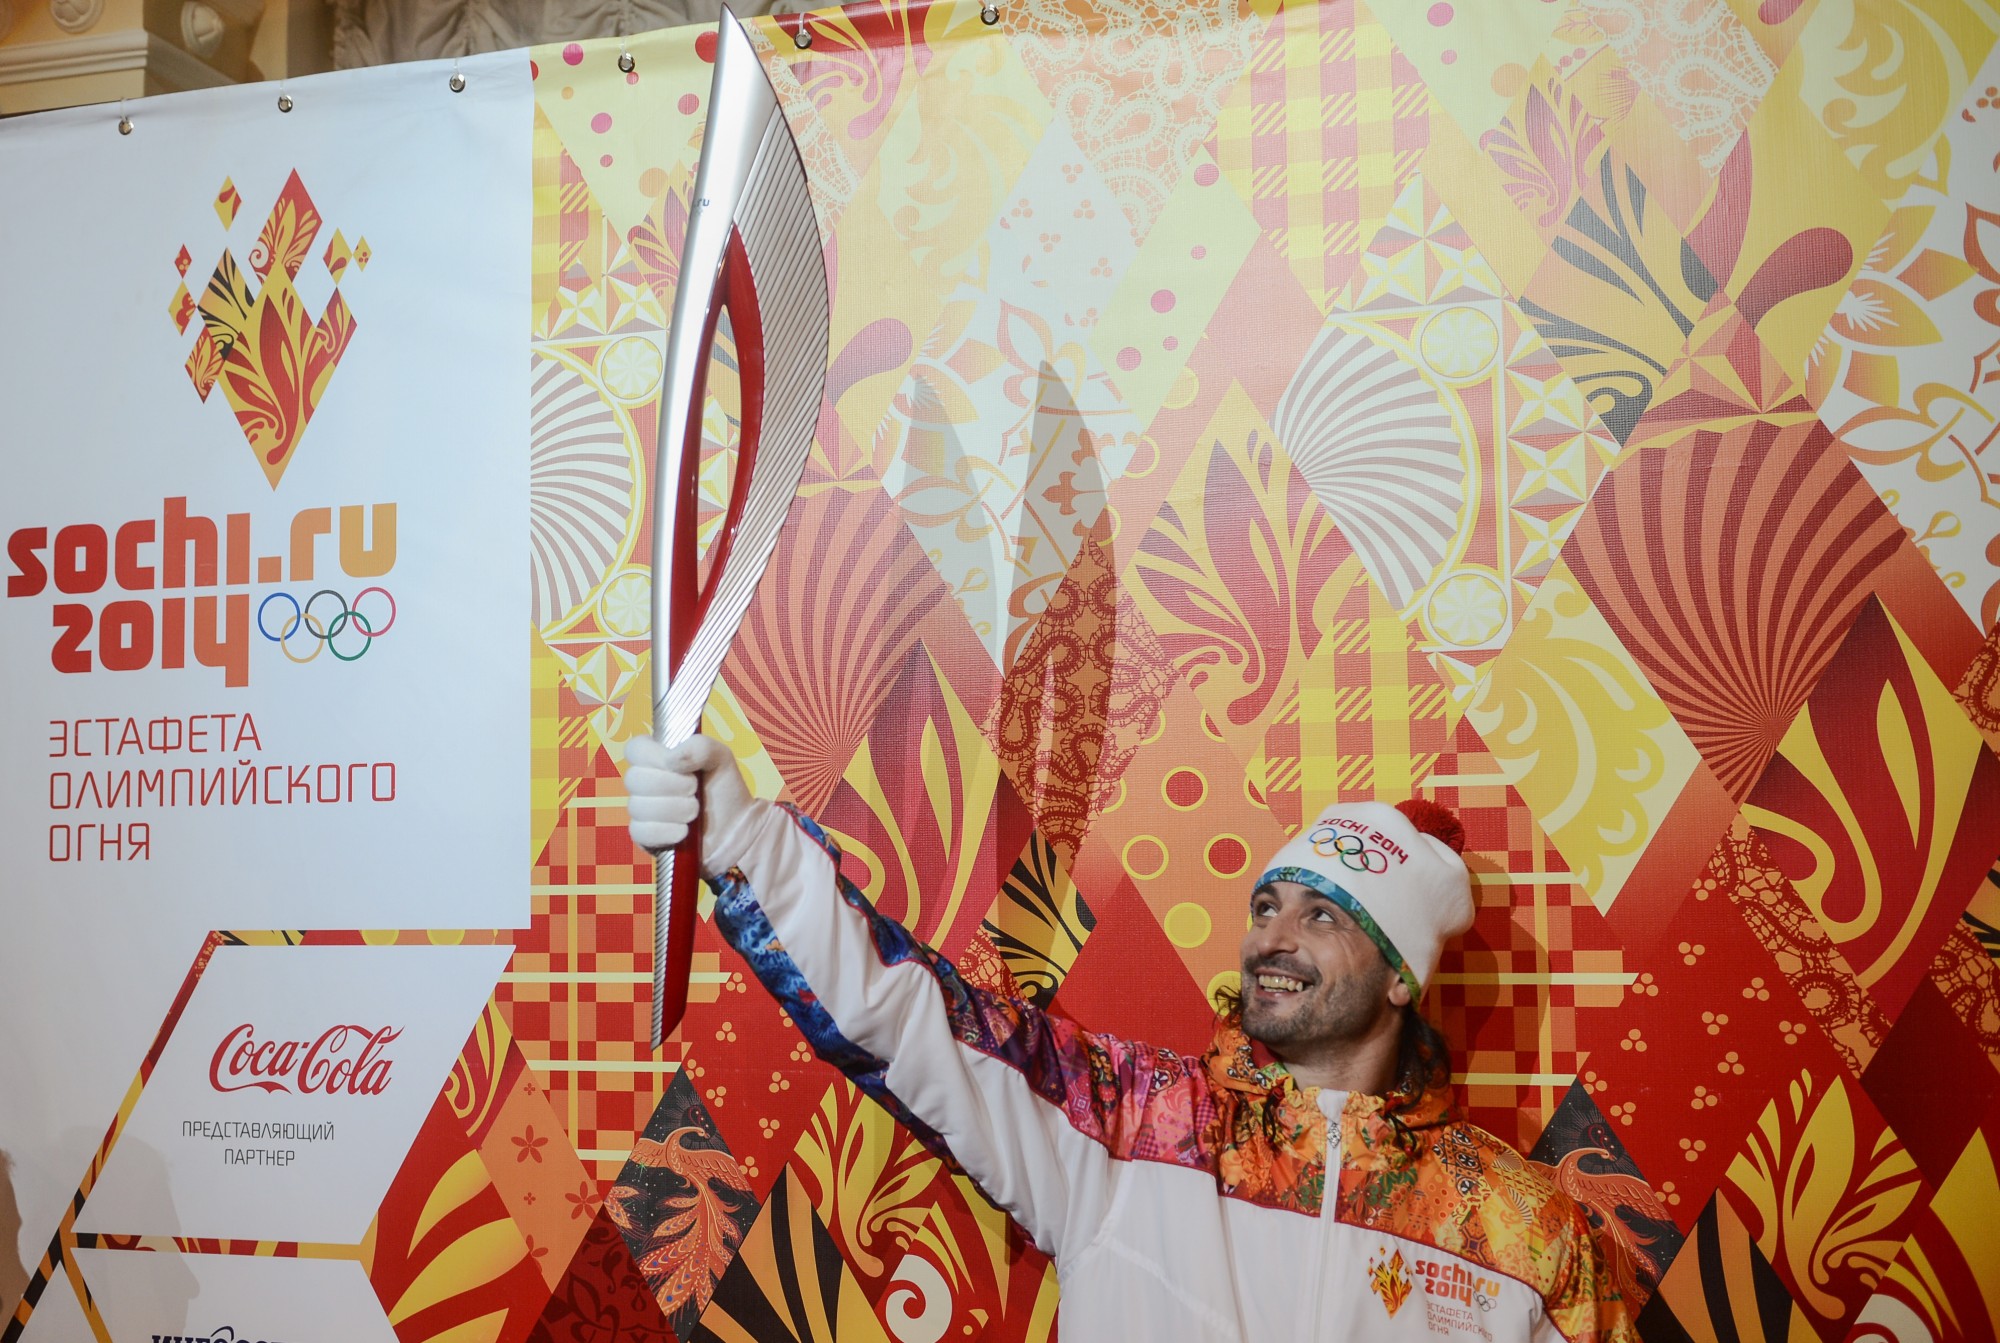 Sochi 2014 Olympic torch unveiled